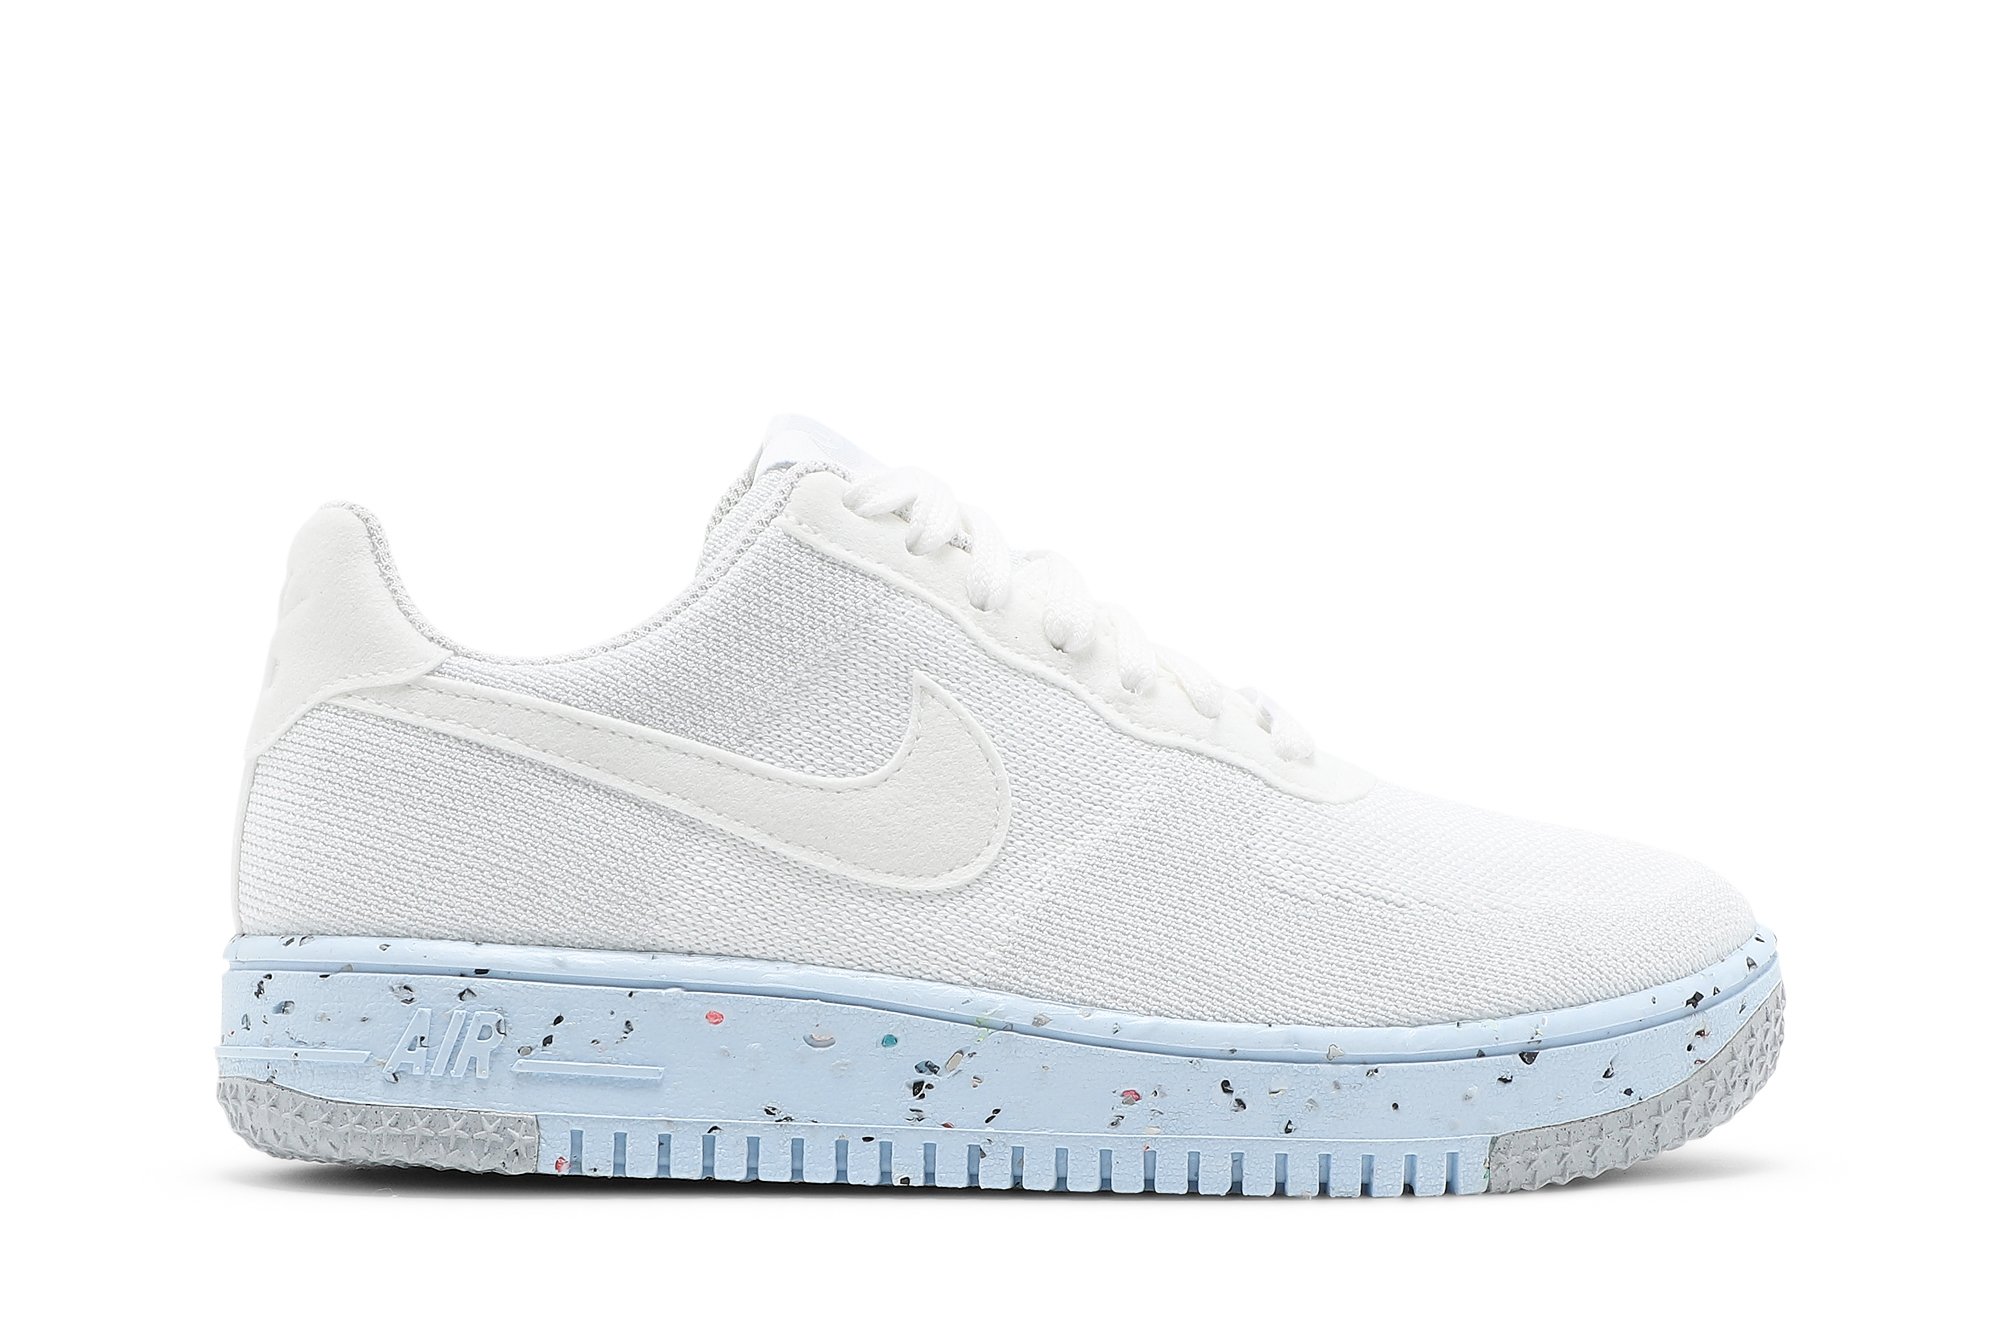 Buy Wmns Air Force 1 Crater Flyknit 'Pure Platinum' - DC7273 100